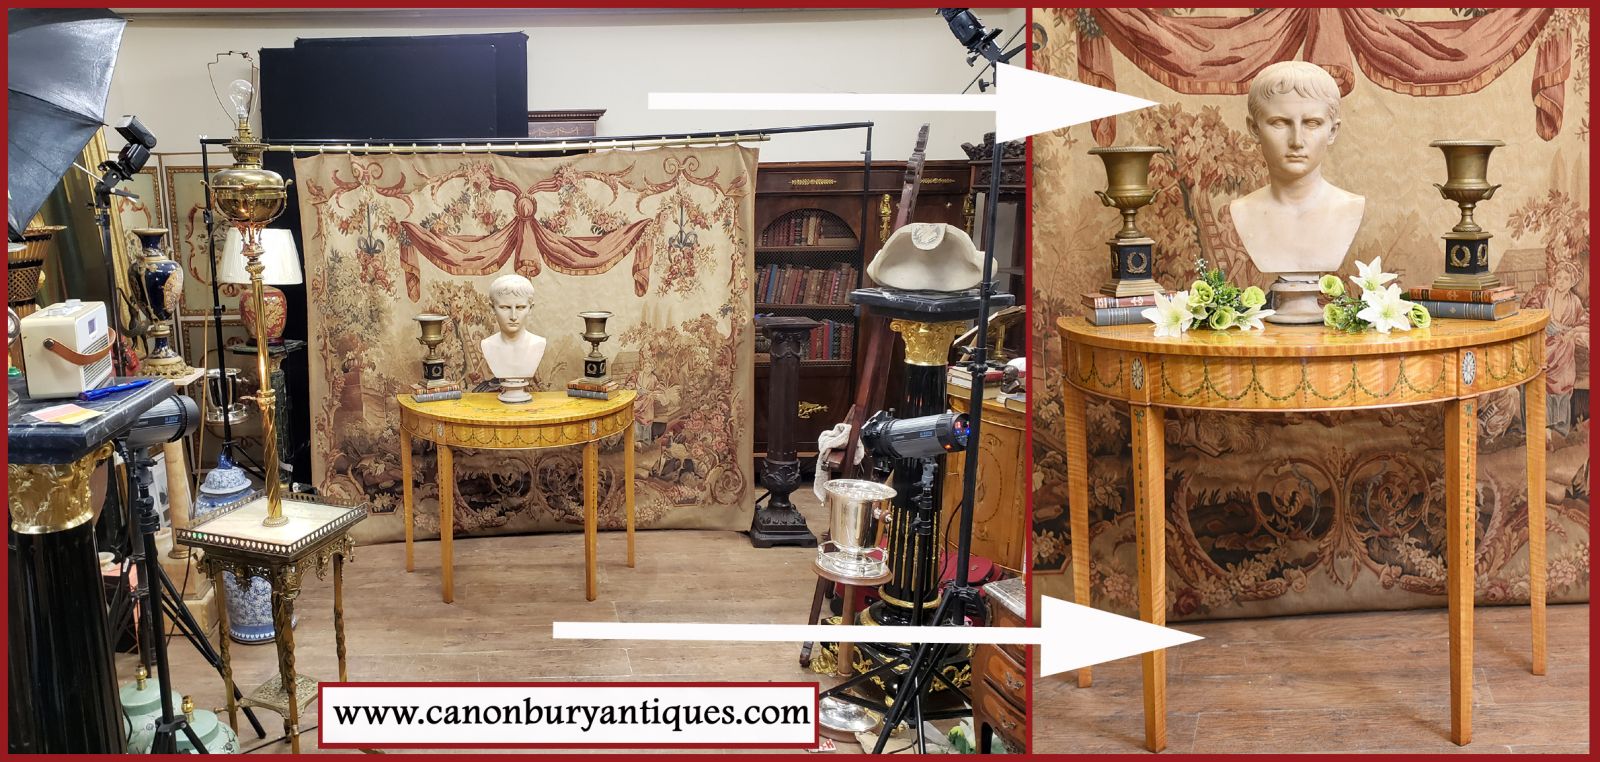 The tapestry backdrop worked wonders with the classically inspired console table